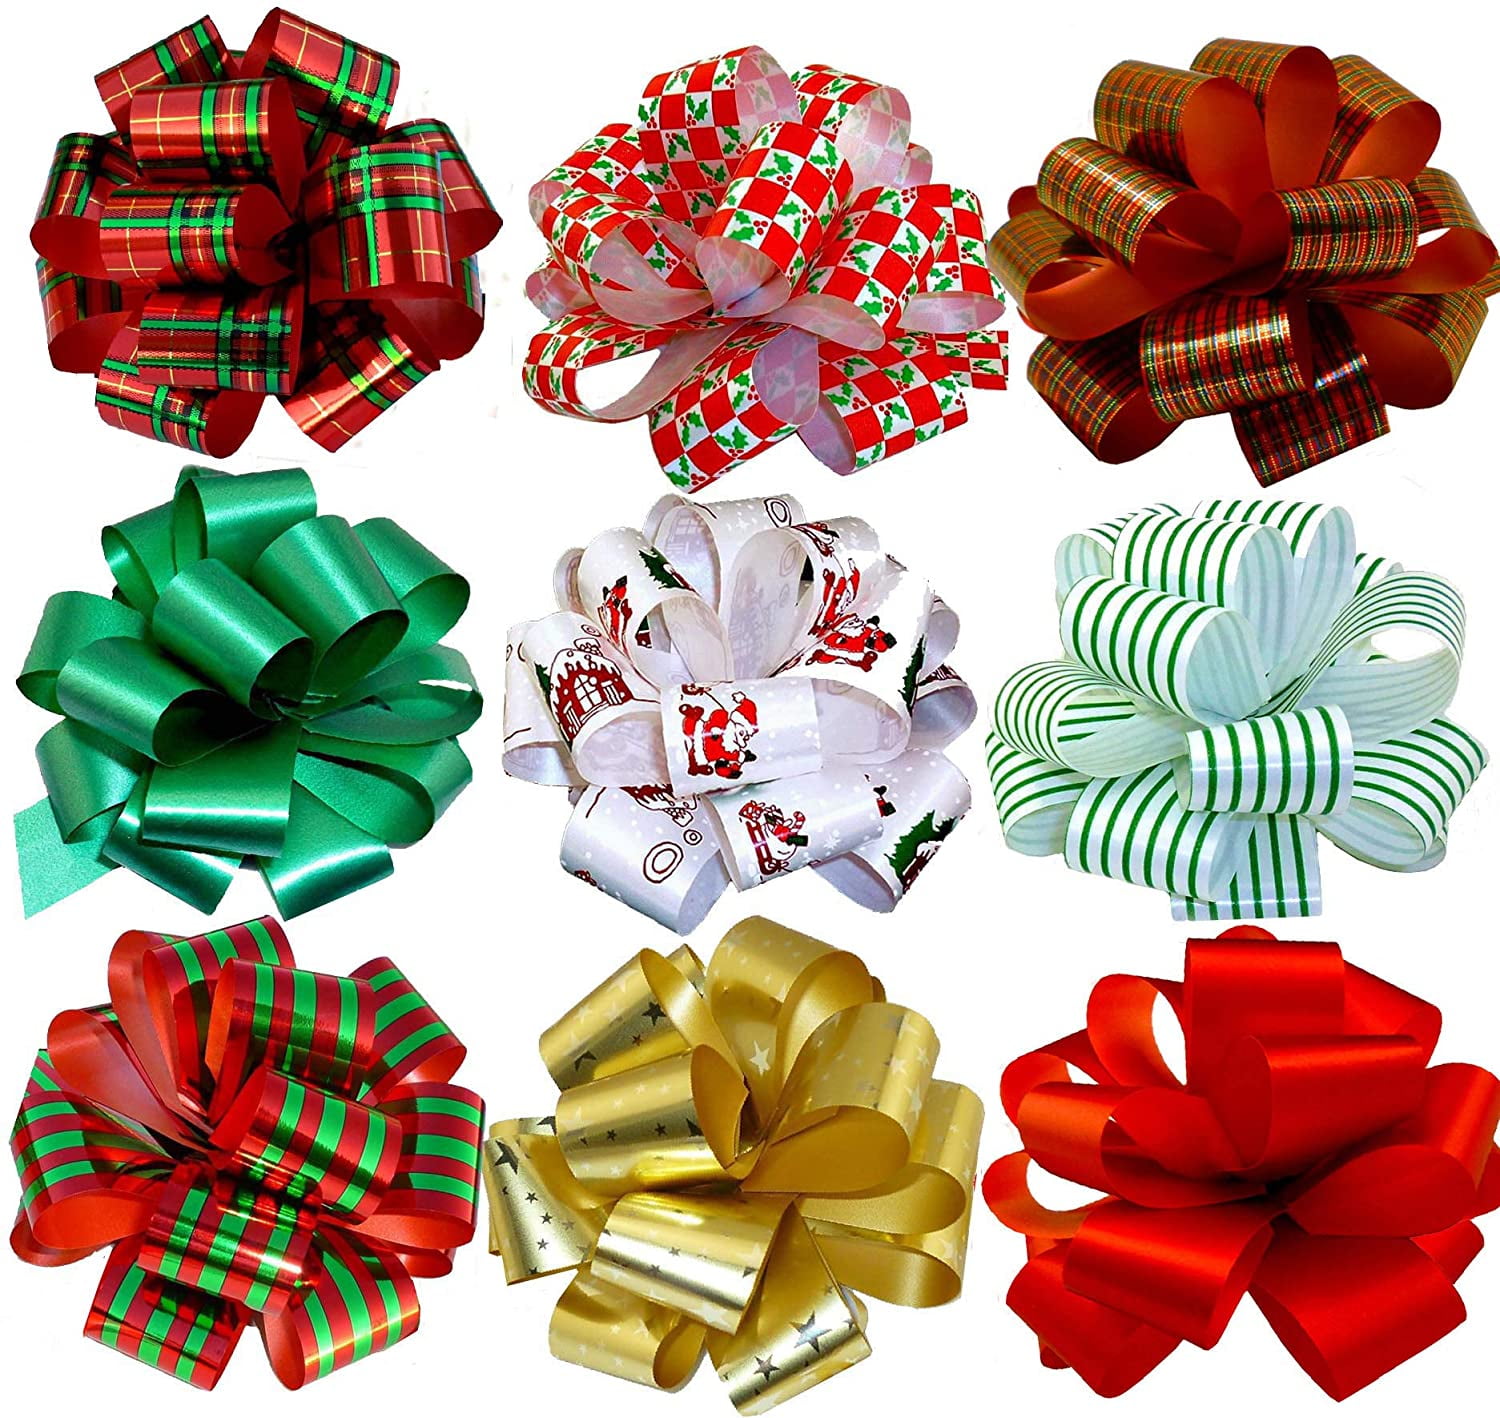 Bows for Gifts Wide 5 in Christmas Pull Bows Green Red Set of 9 Boxing Day Gold 13 cm Xmas Presents Swirls Stripes 